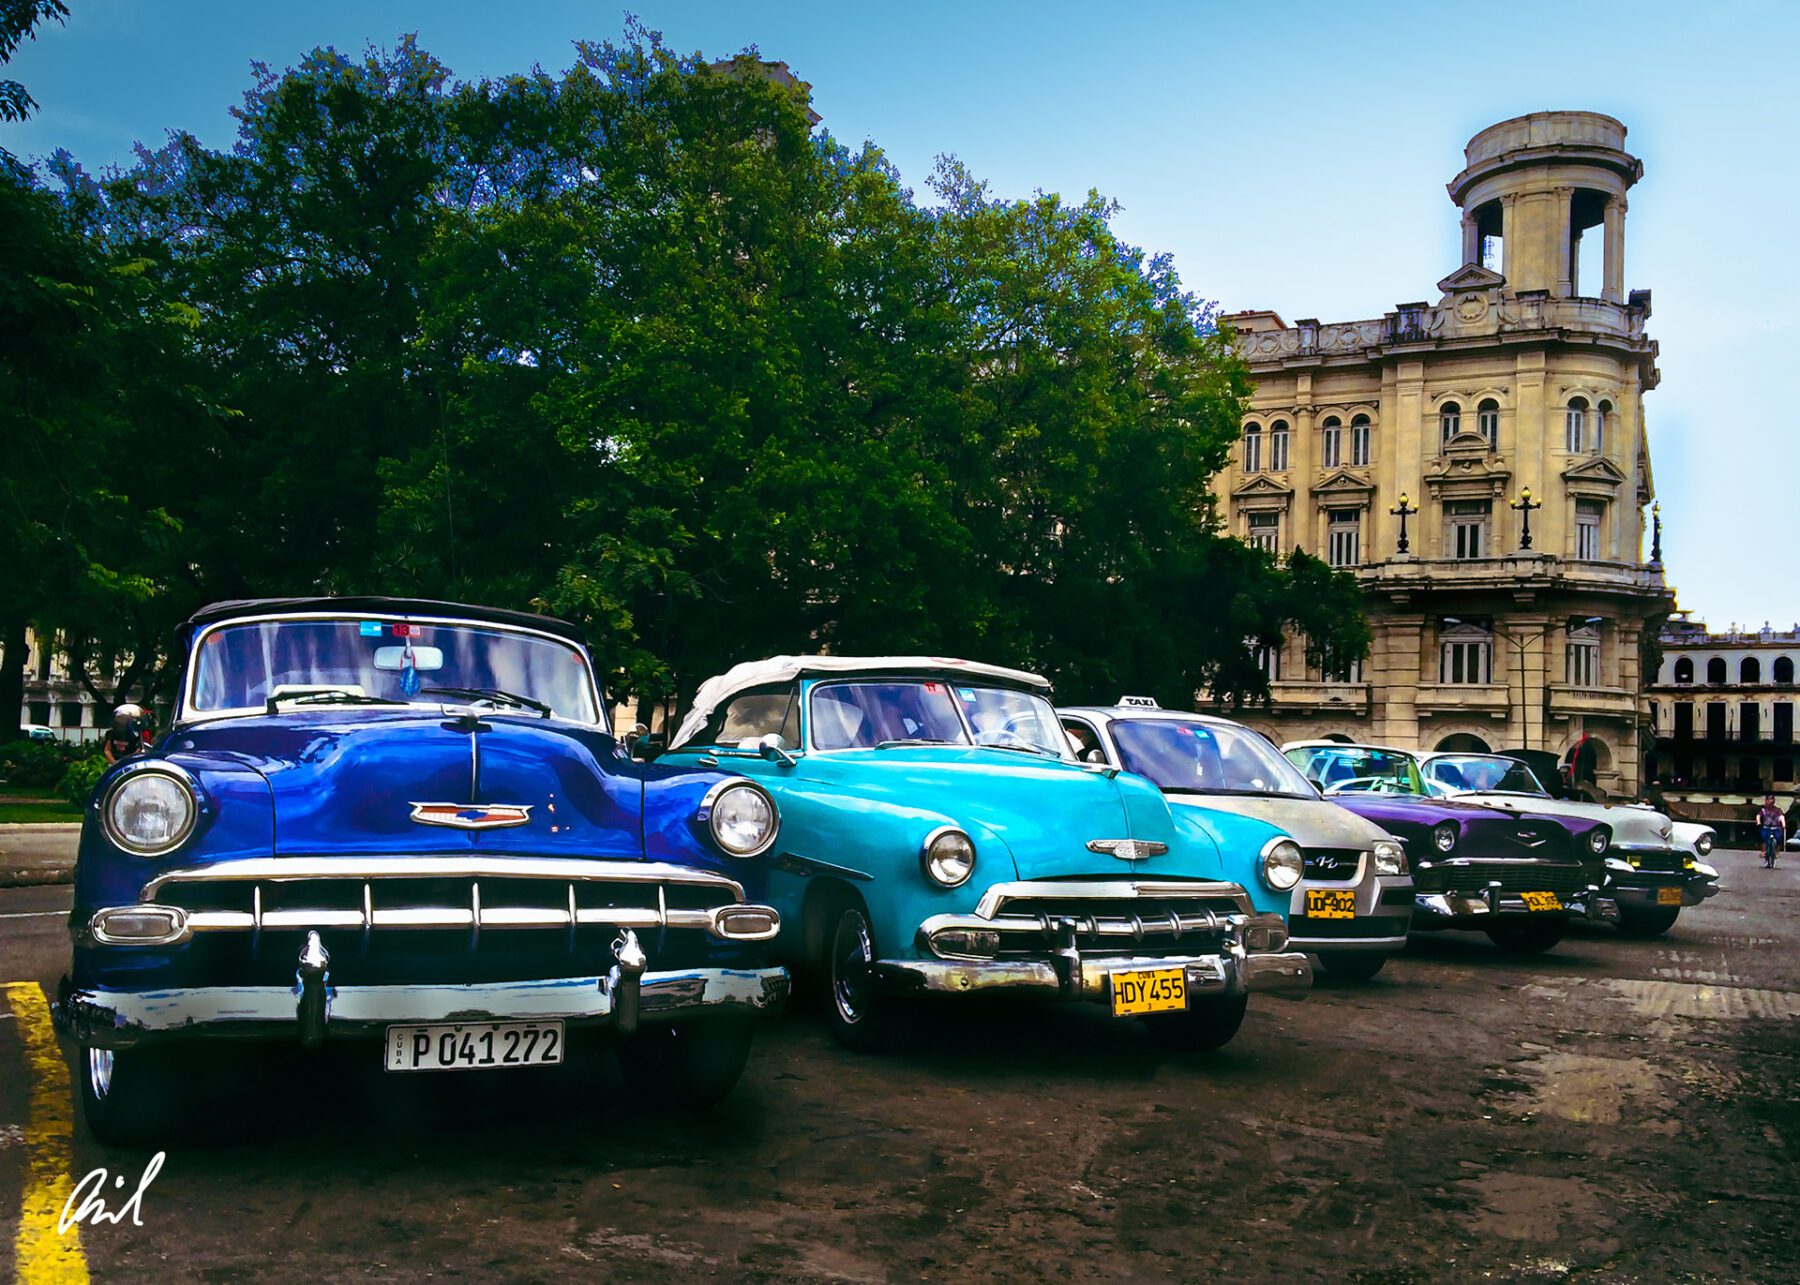 A group of Cubas parked in front of a building.